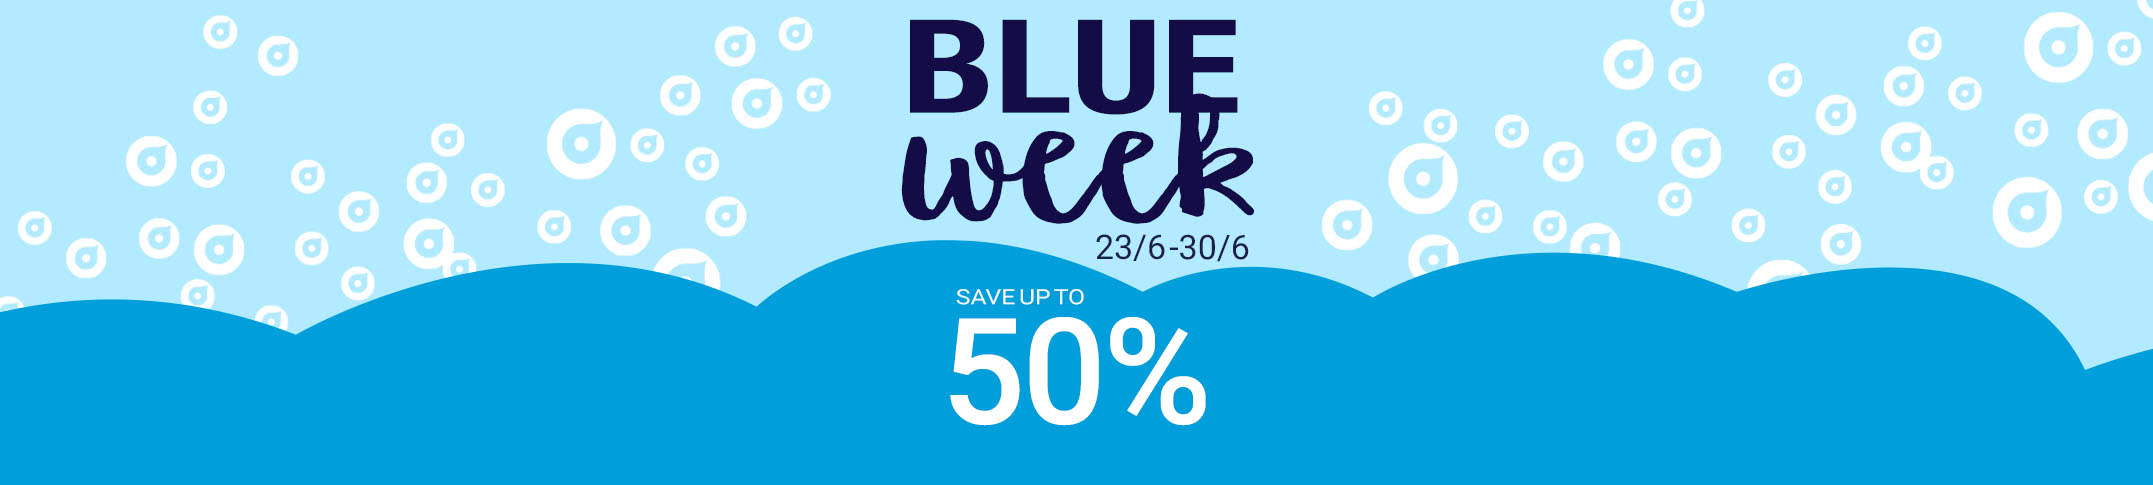 💙 Blue Week - Save up to 50% | Smartphoto